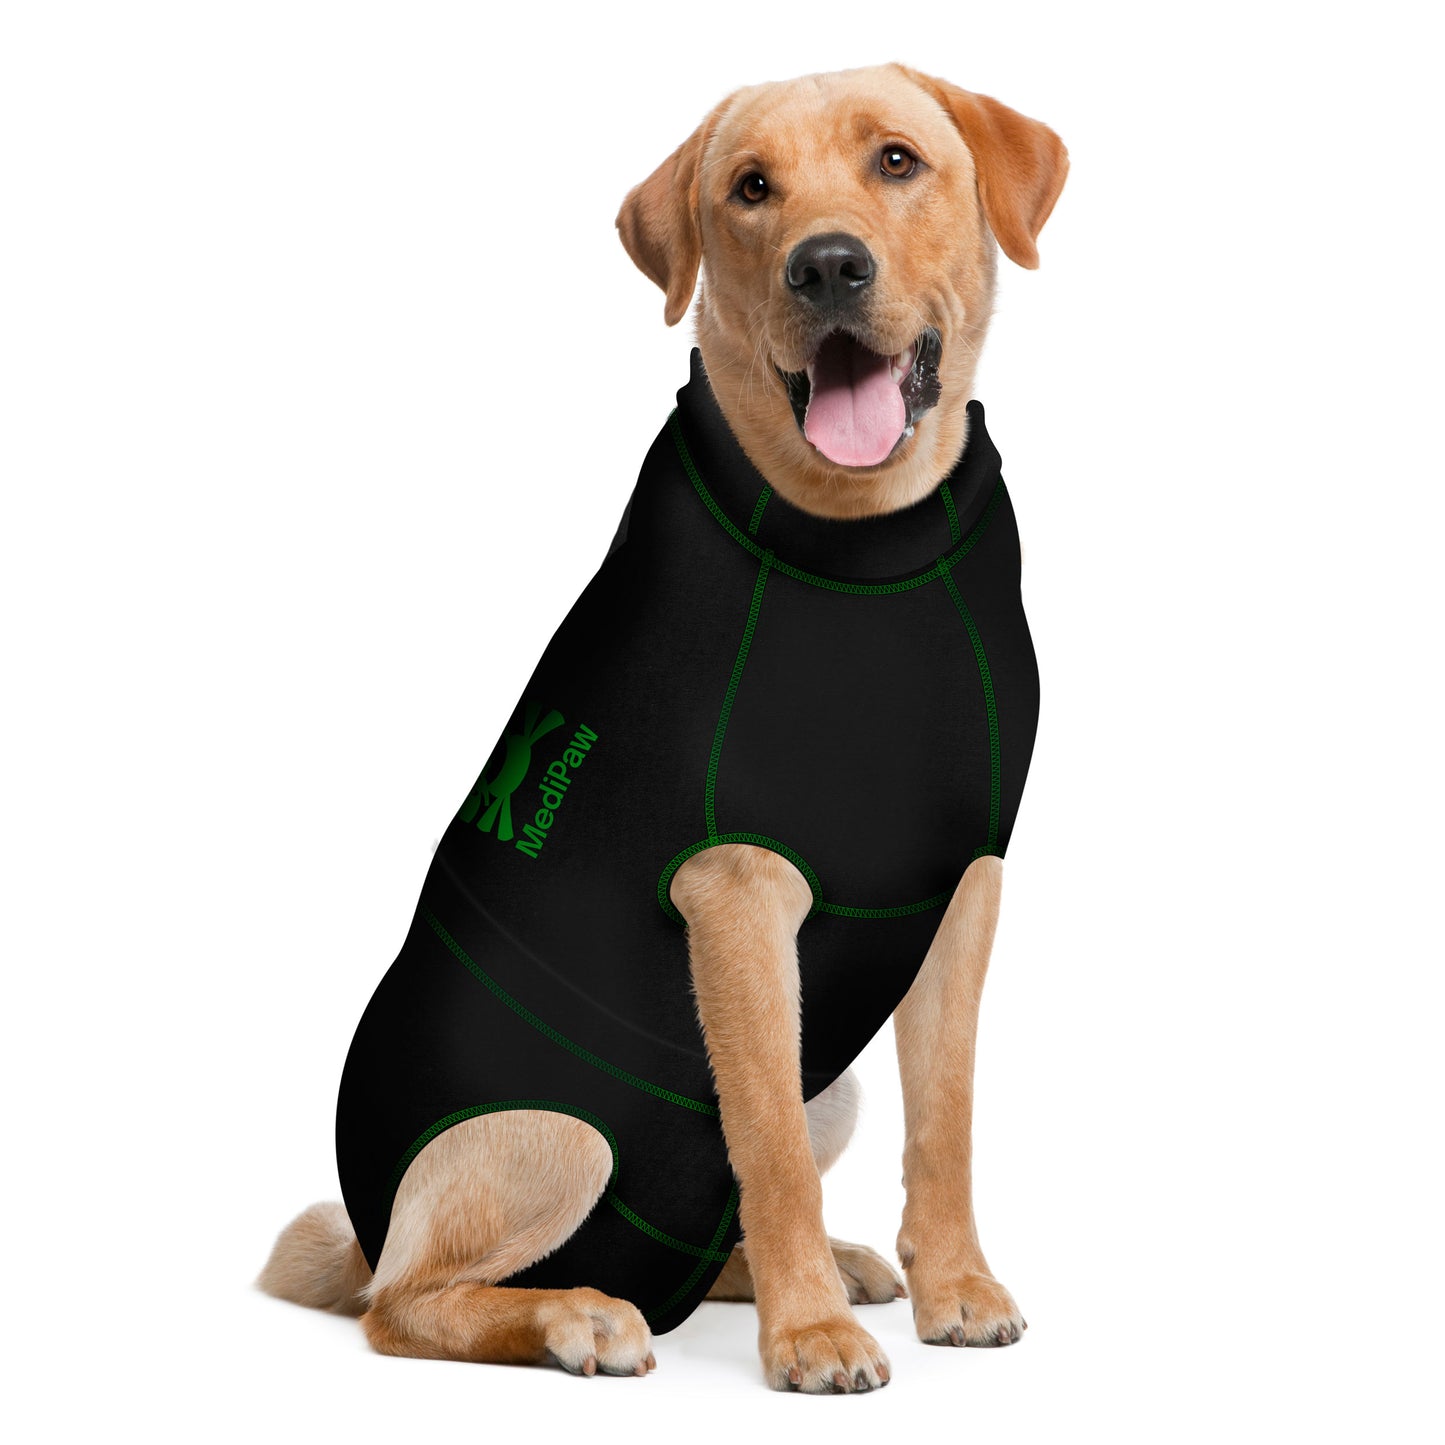 A dog wearing a Your Whole Dog MediPaw Protective/Surgical Dog Suit in Australia.